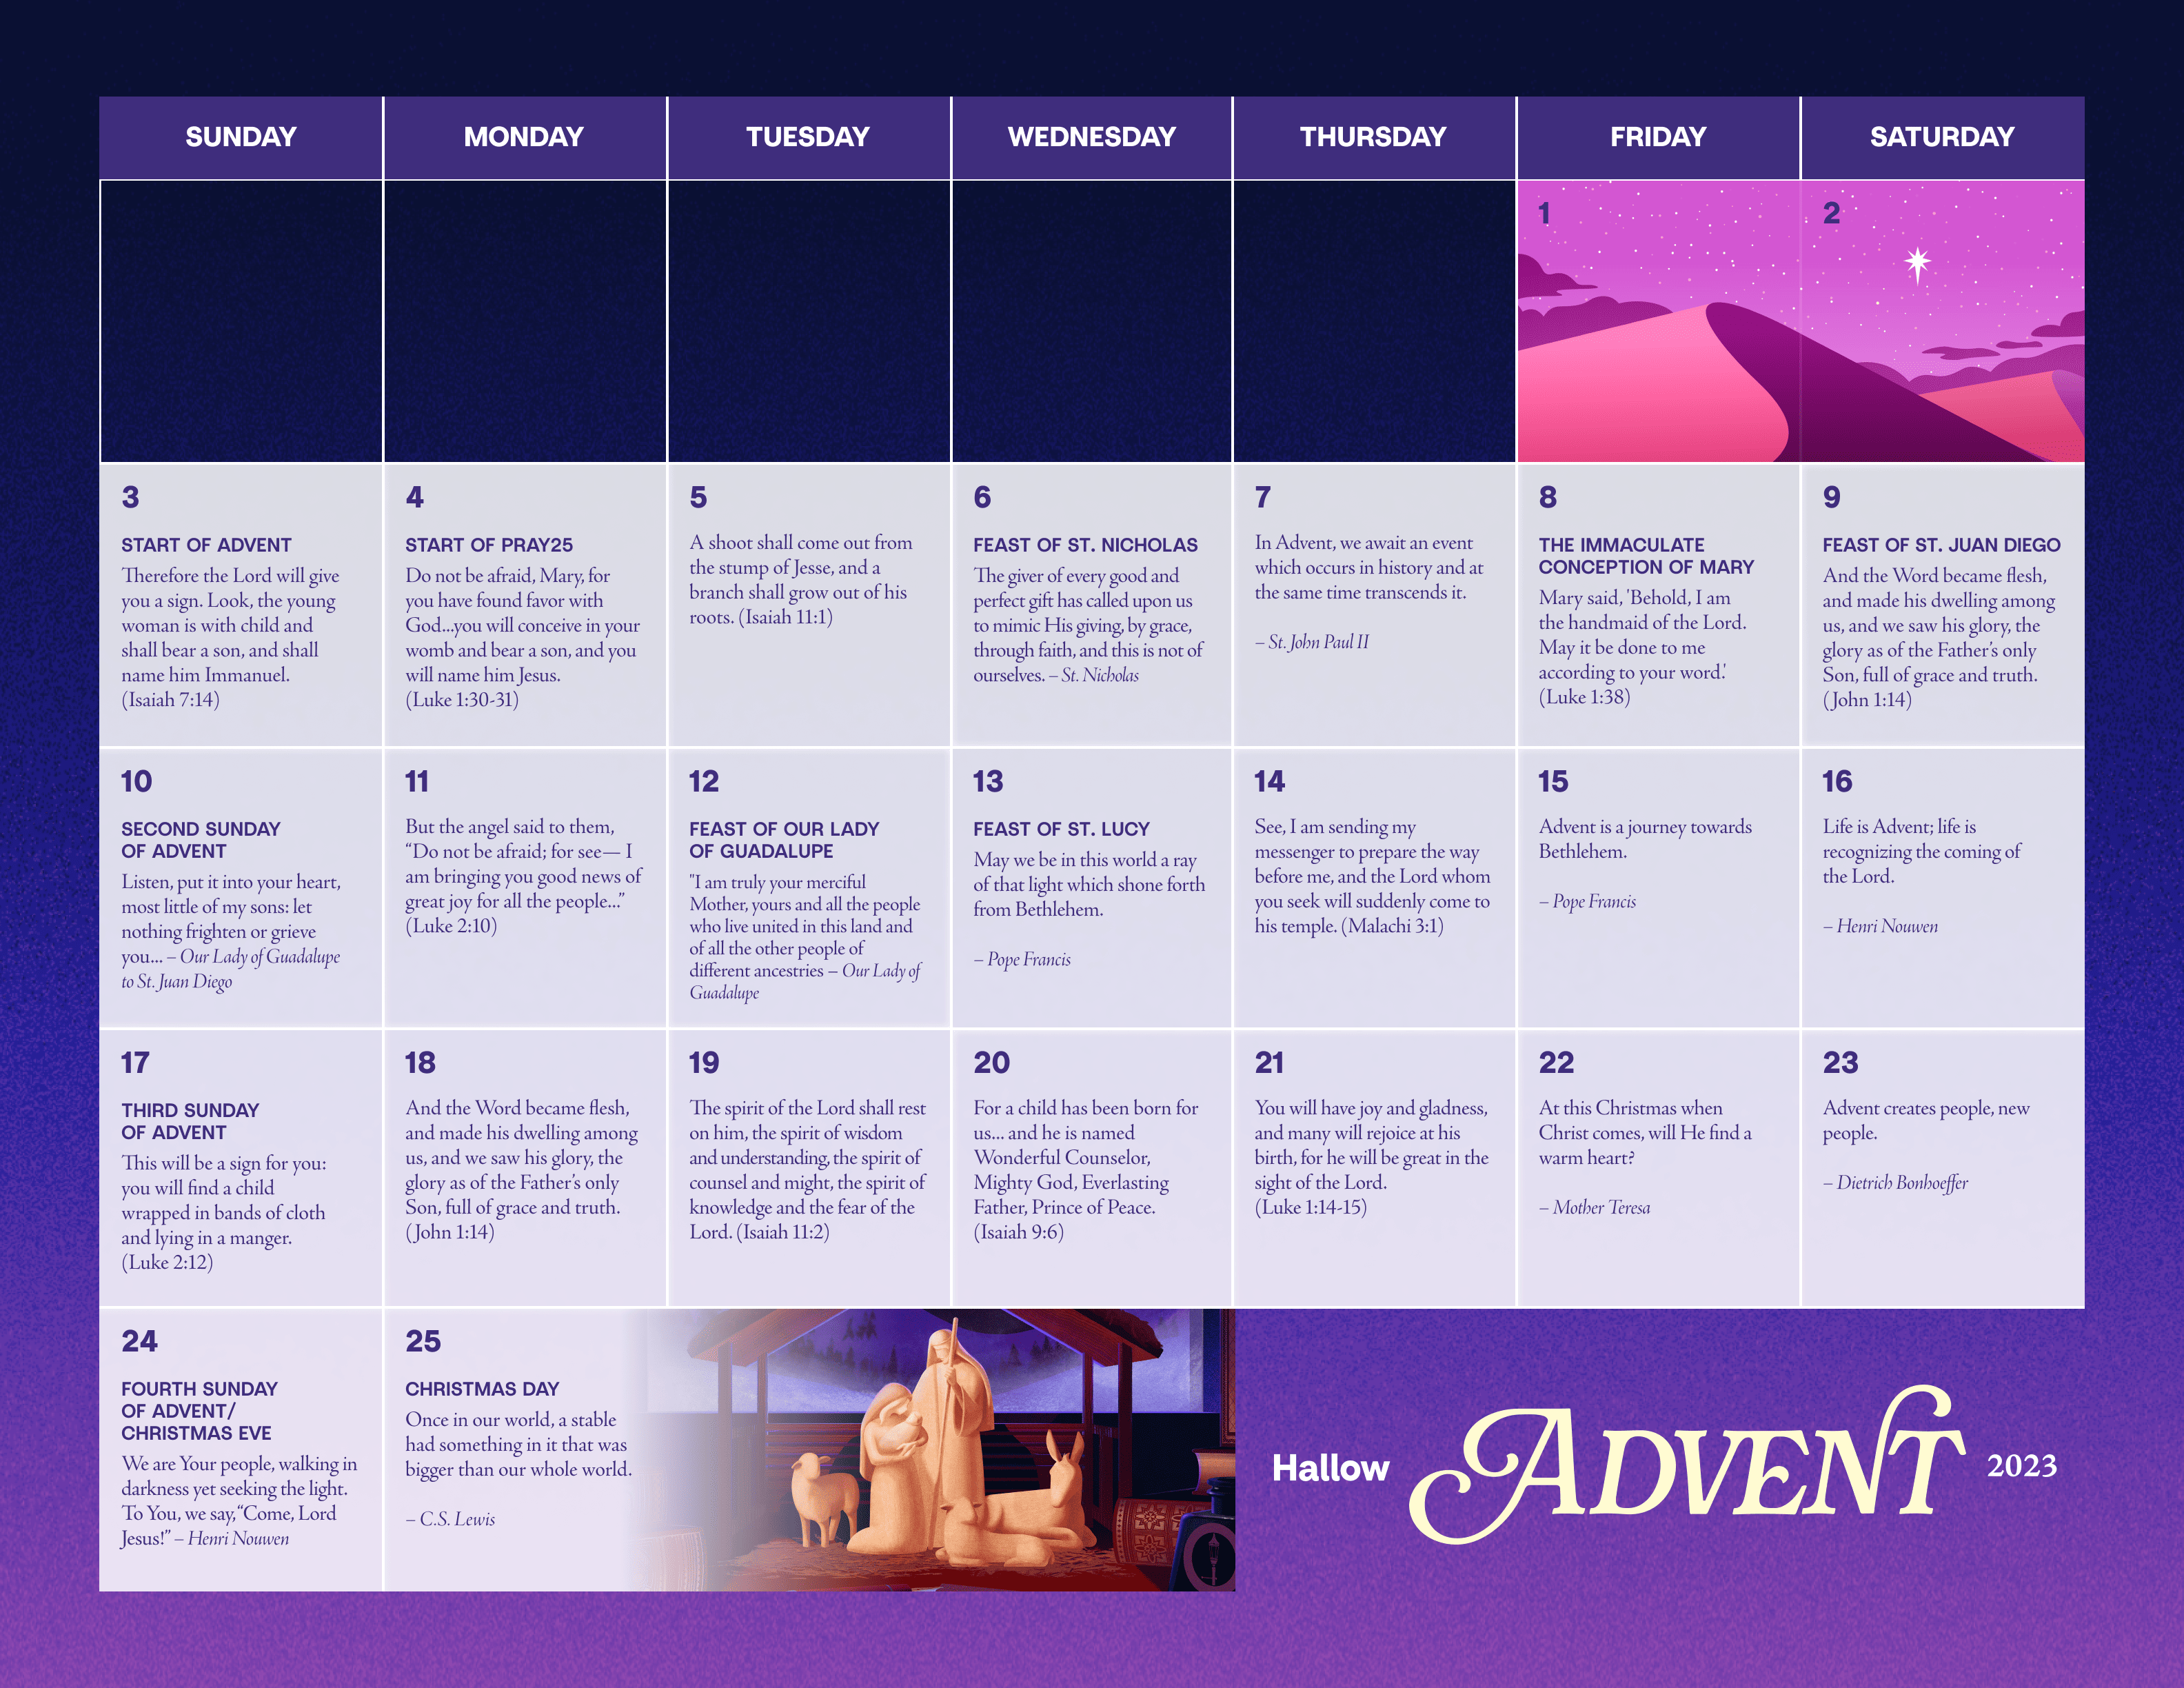 A calendar showing the season of Advent in 2023